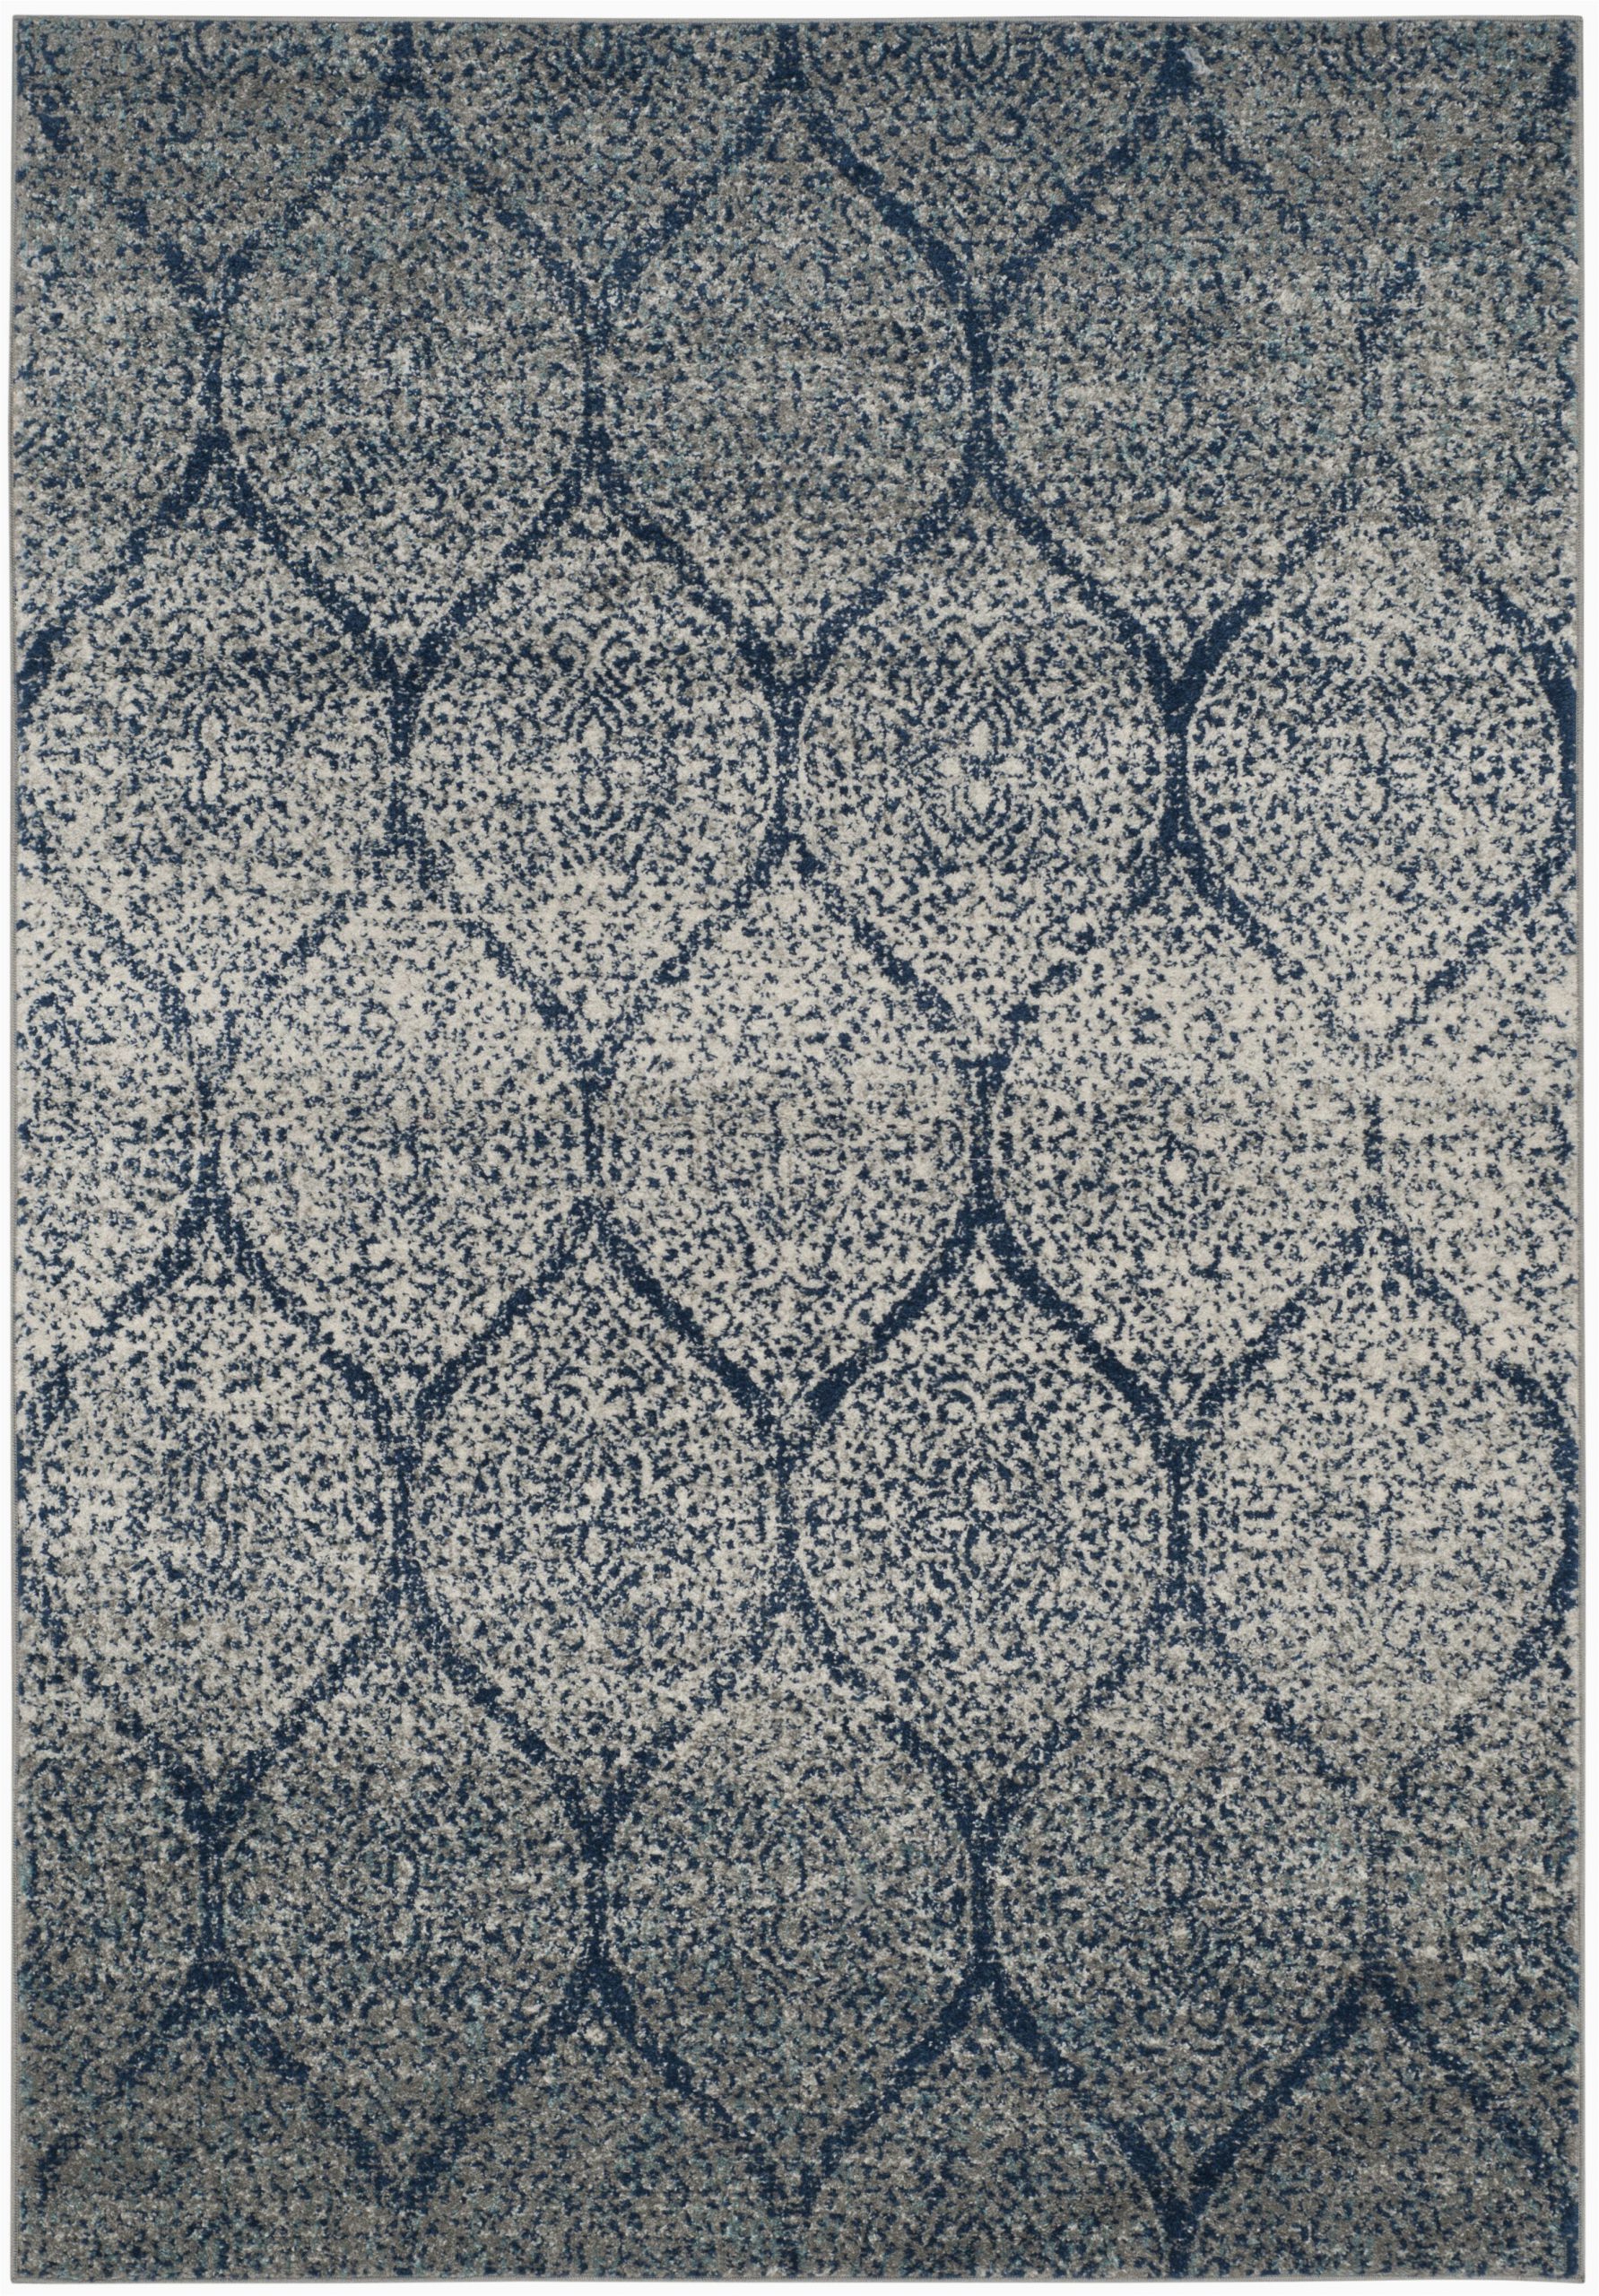 Navy Blue and Black area Rug Katie Damask Navy Blue Silver area Rug